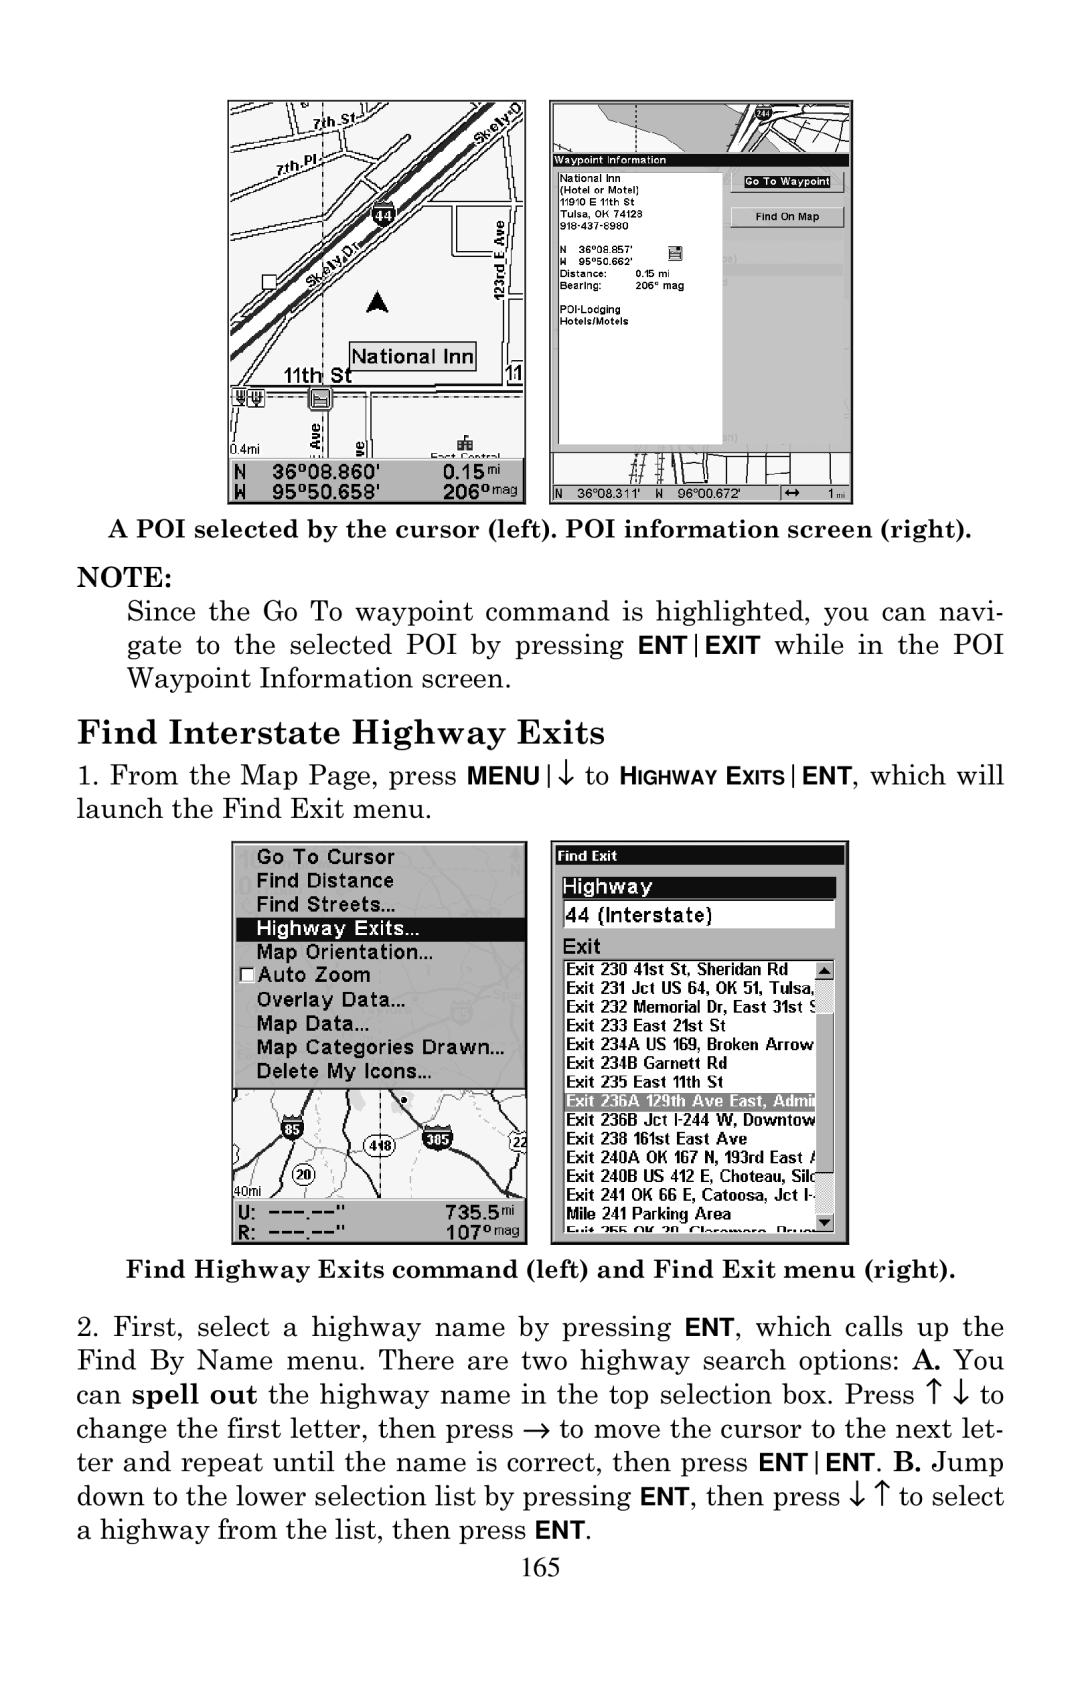 Eagle Electronics 640C, 640cDF manual Find Interstate Highway Exits 